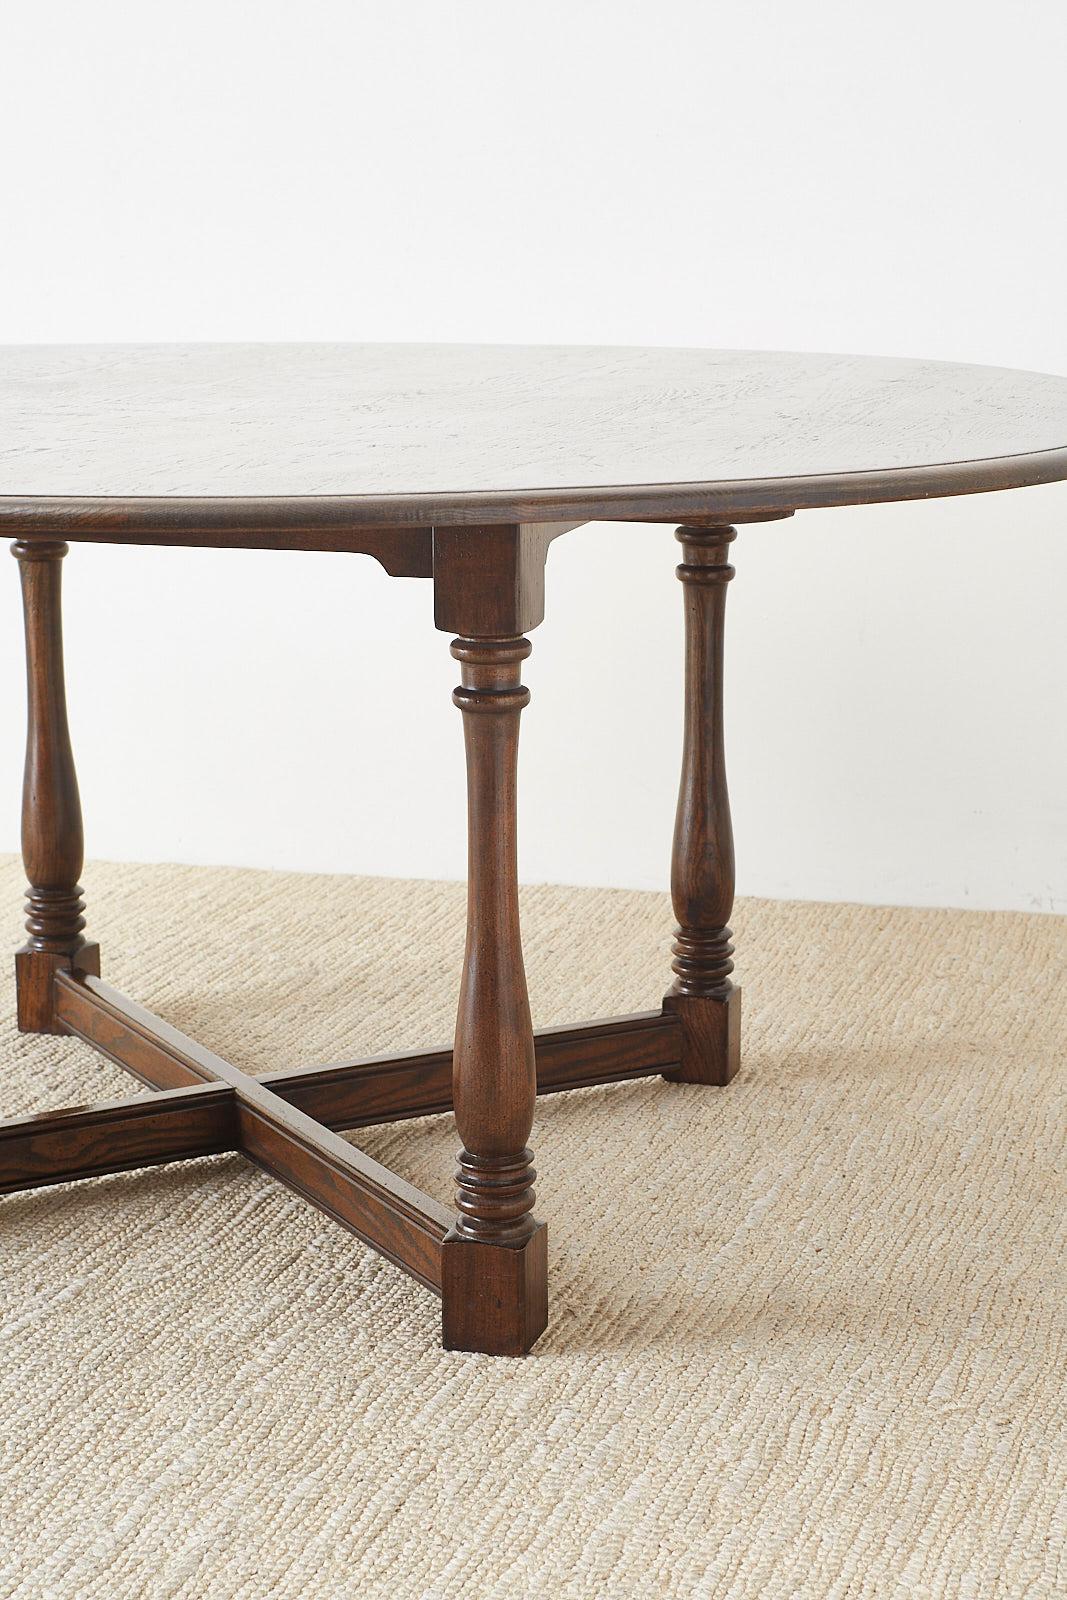 English Country Style Round Oak Dining Table 10